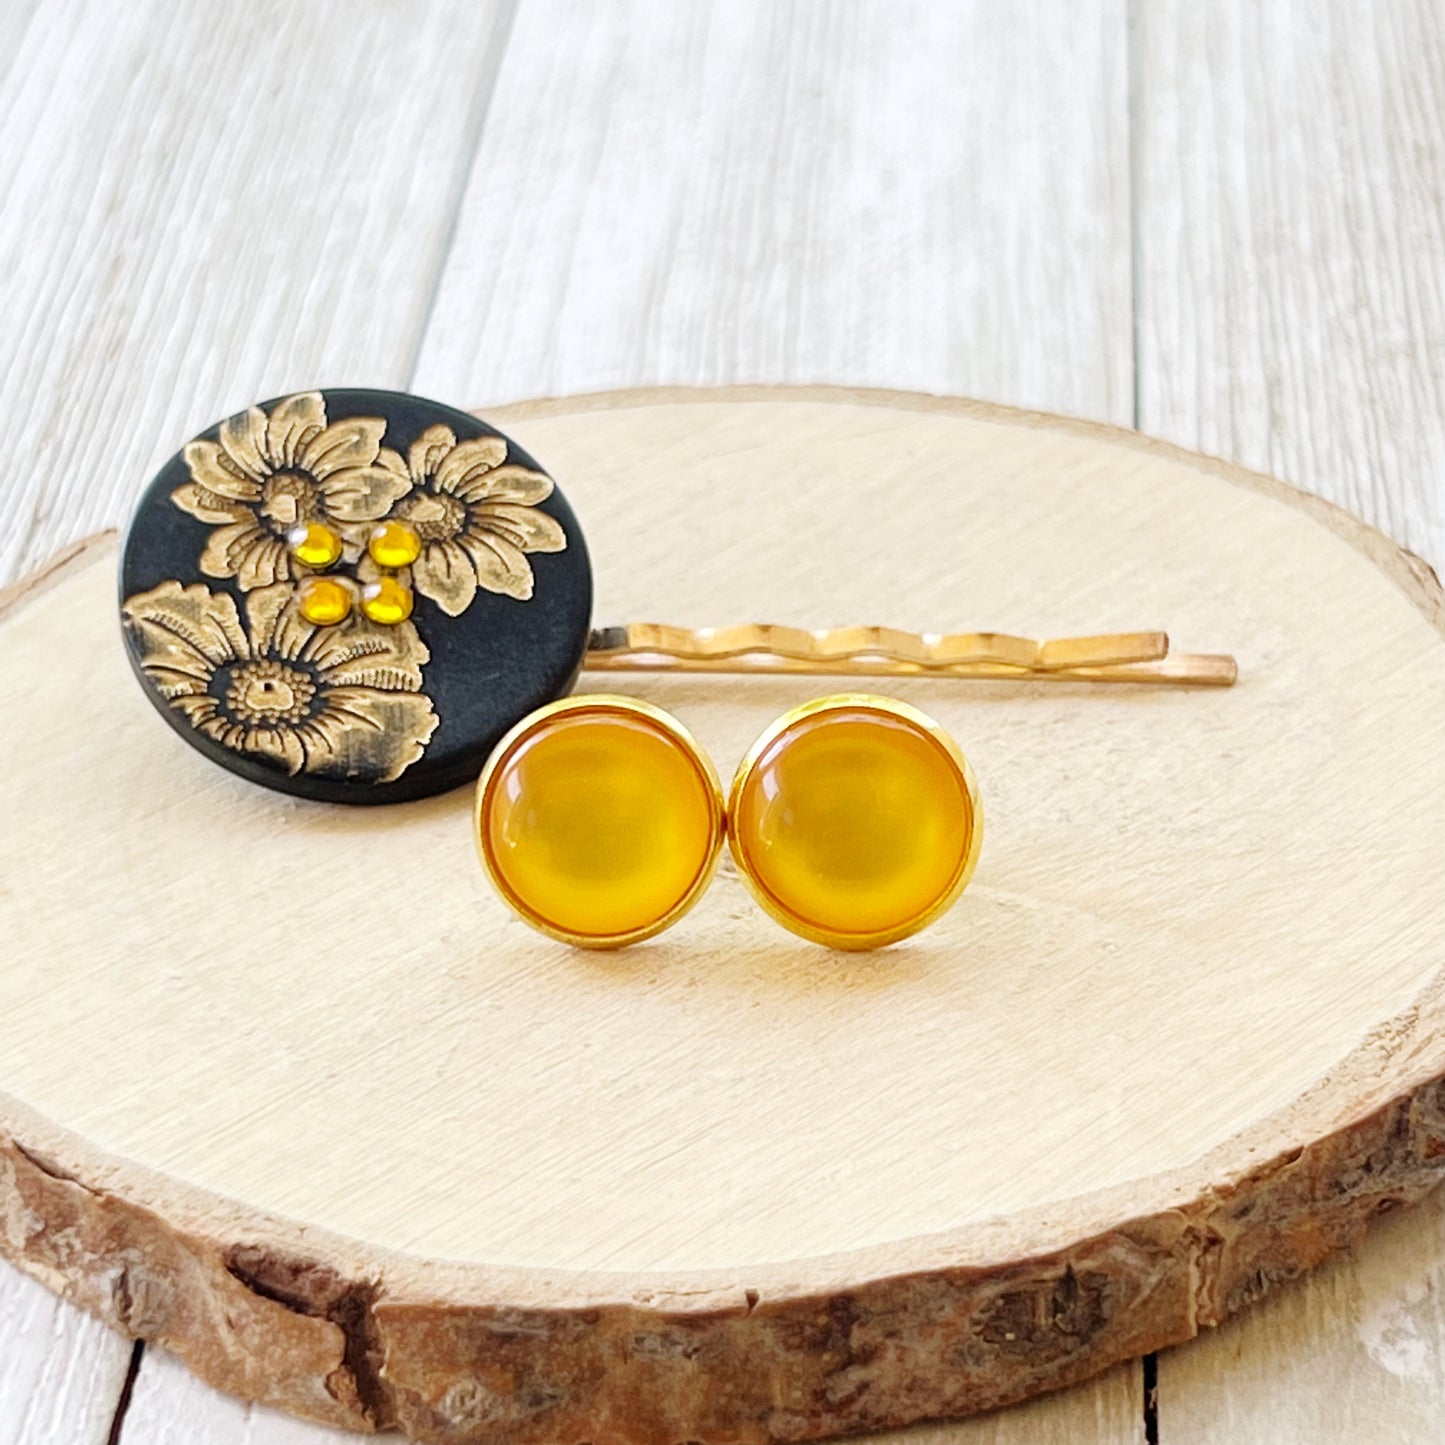 Black & Gold Sunflower Gold Bobby Pin with Matching 12mm Gold Earrings - Stylish Floral Accessories